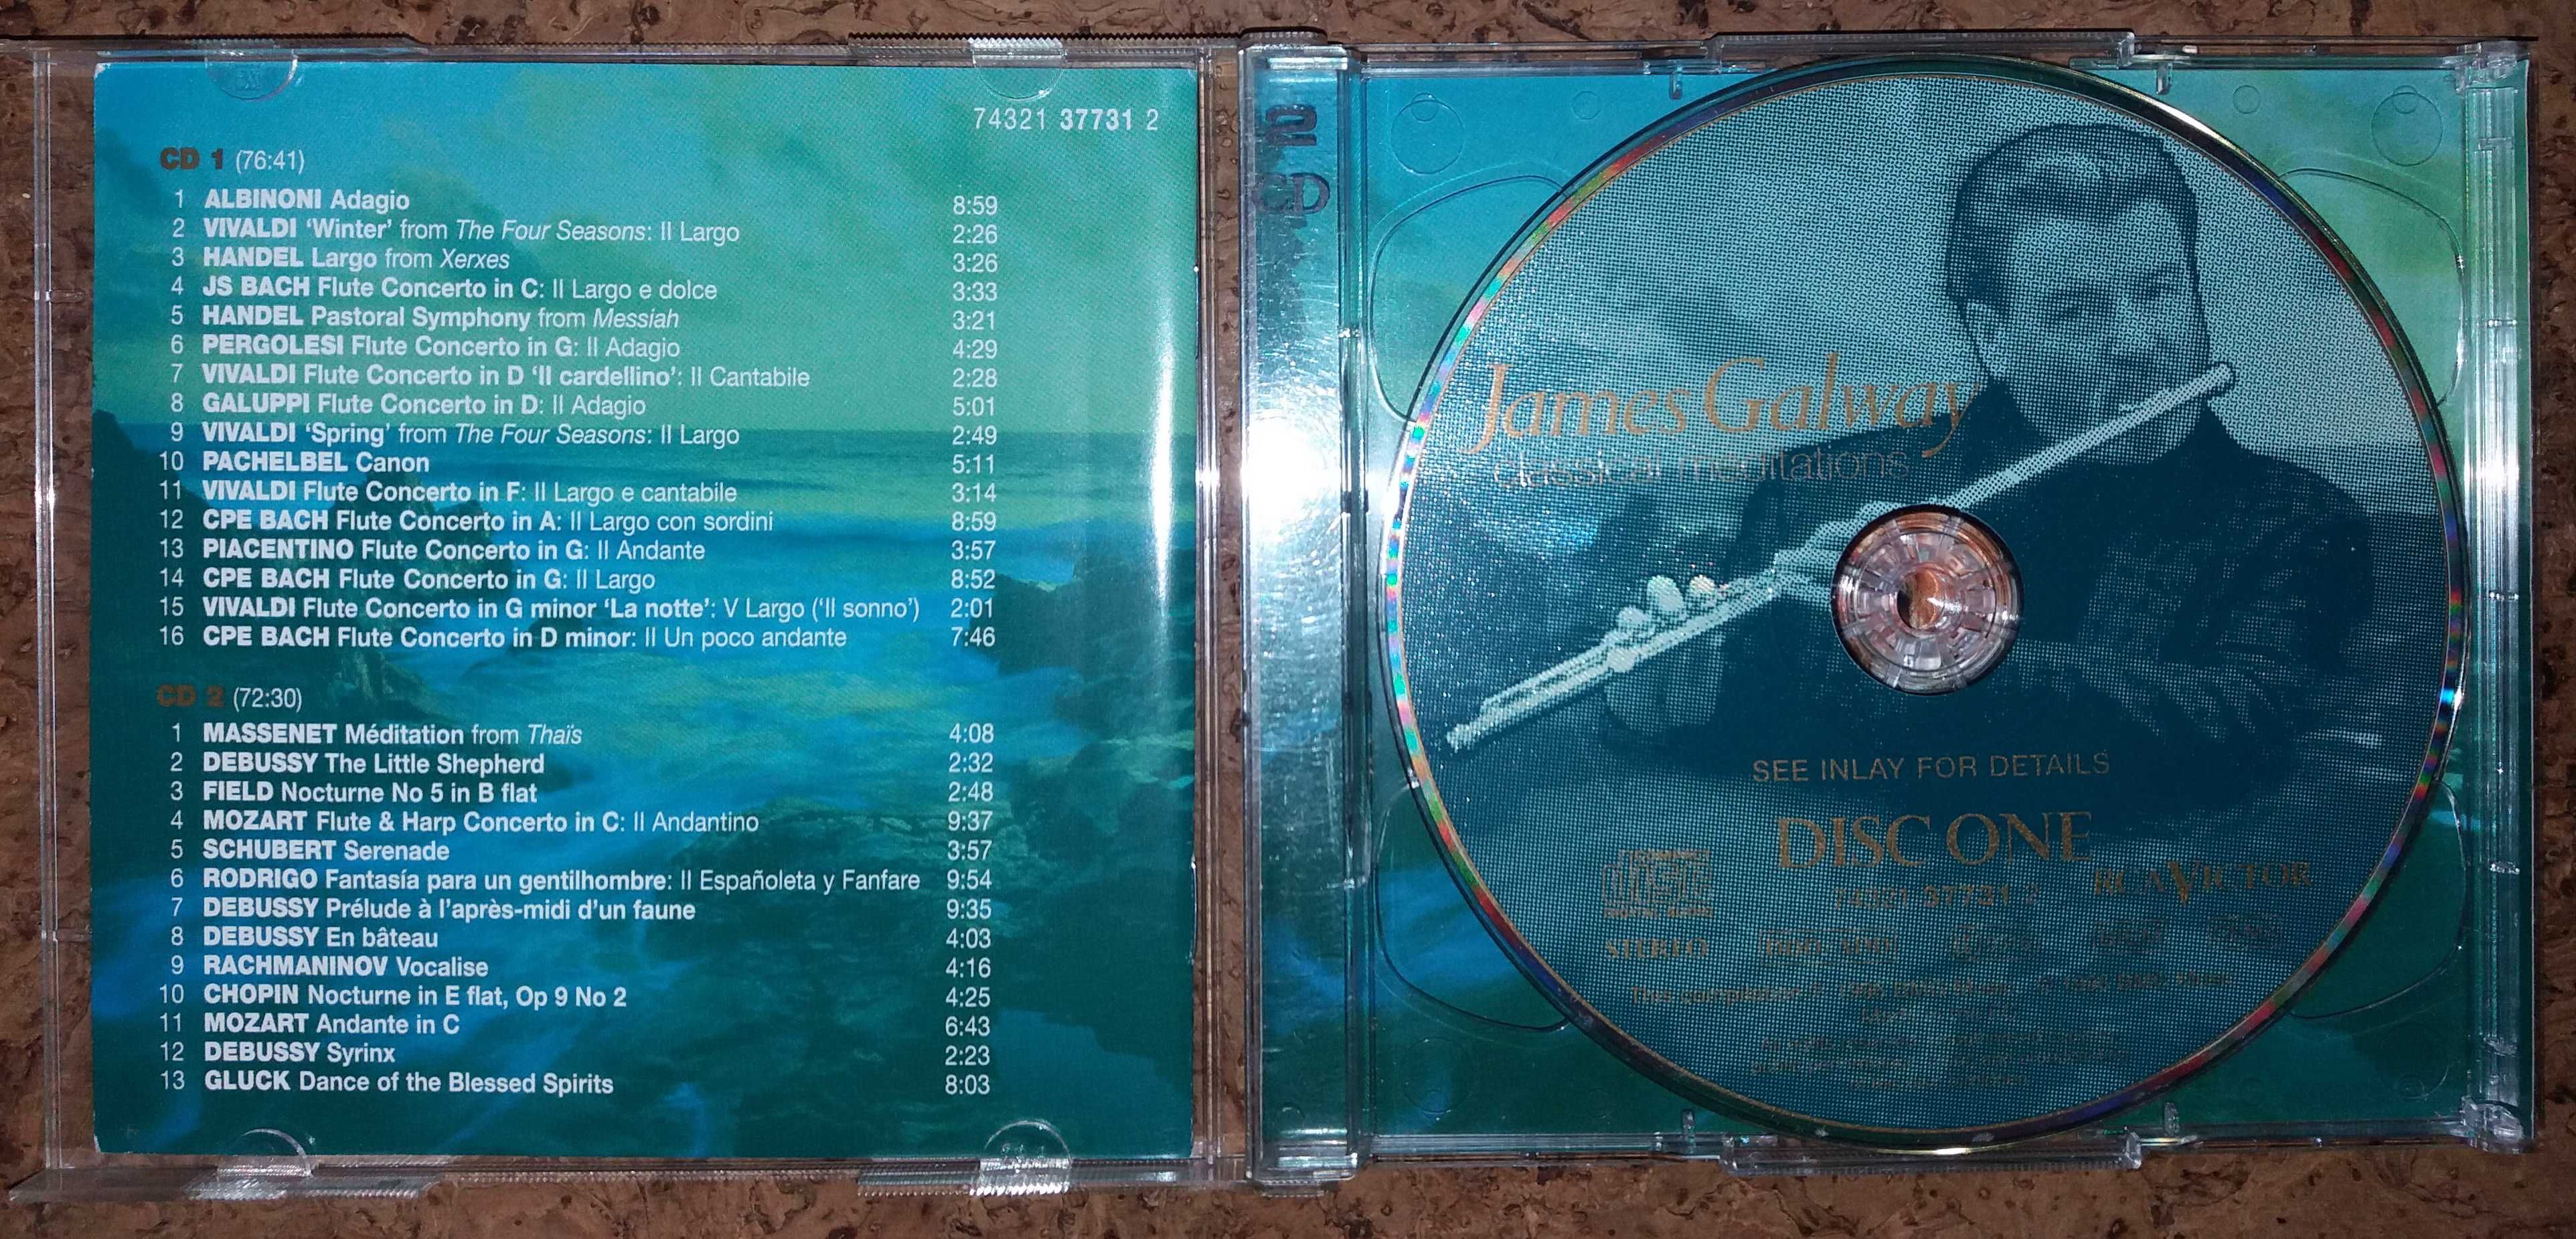 CD James Galway - Classical Meditations. 2xCD. Классика.Флейта.